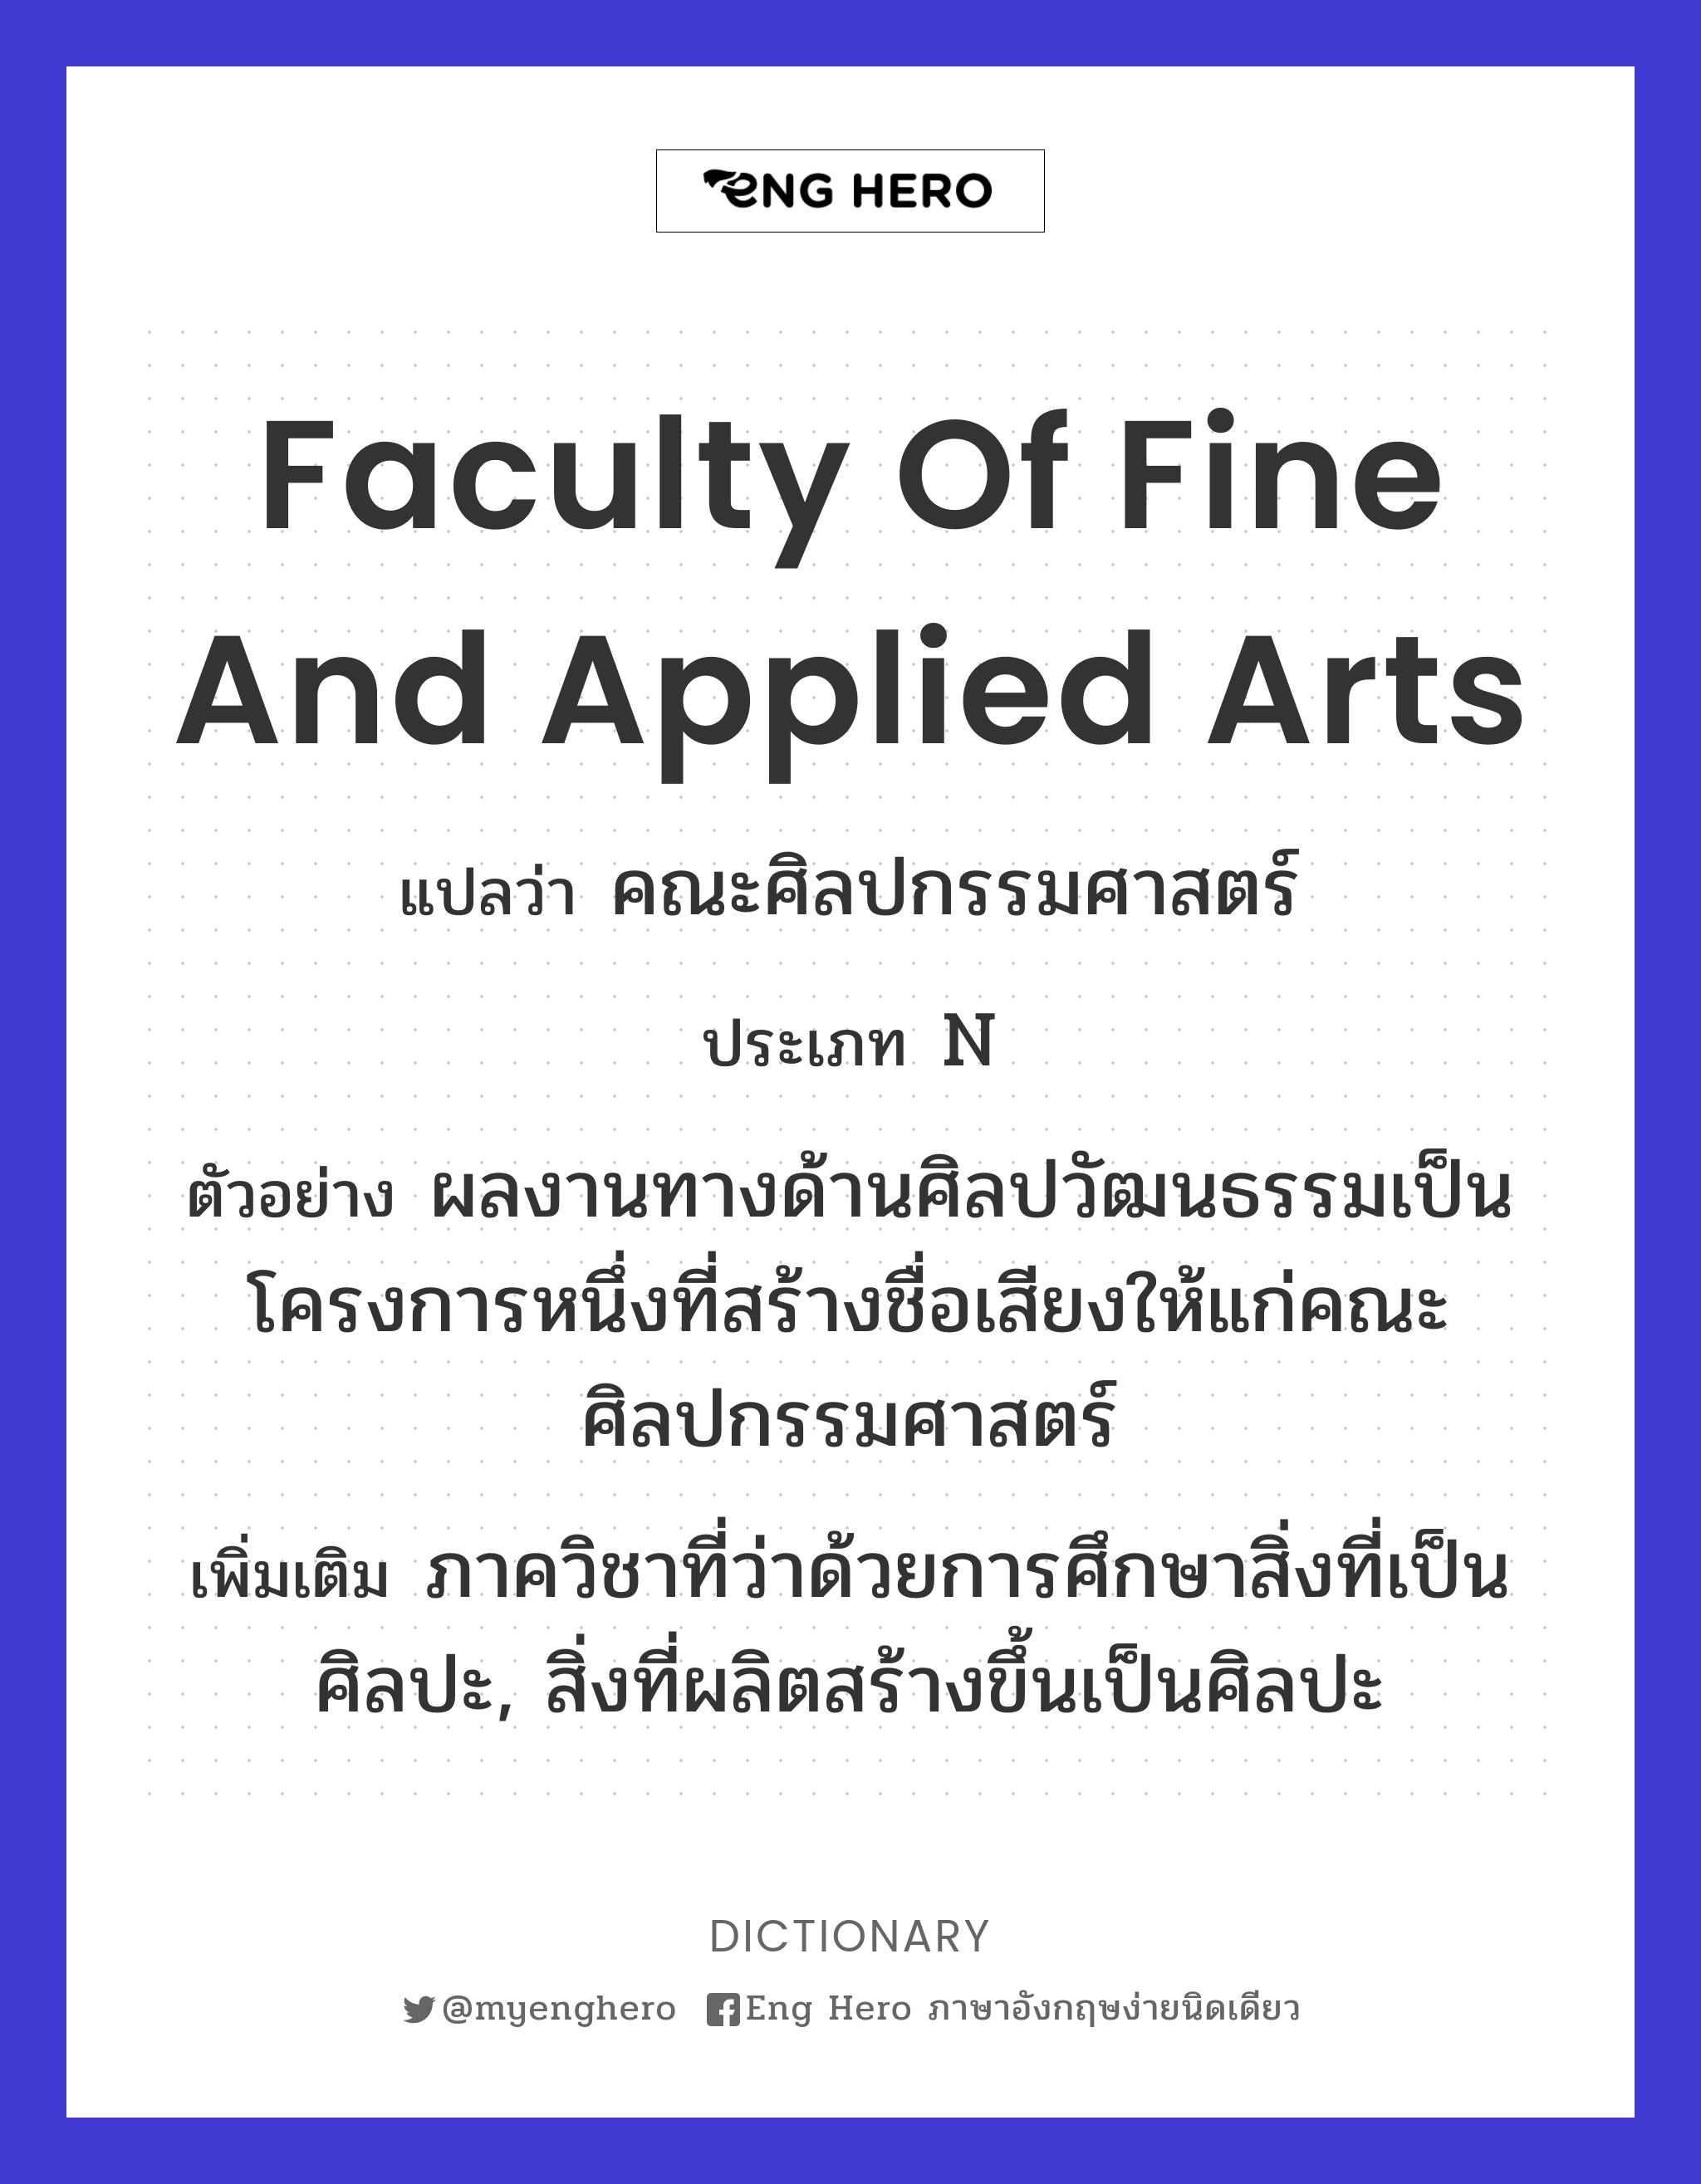 Faculty of Fine and Applied Arts